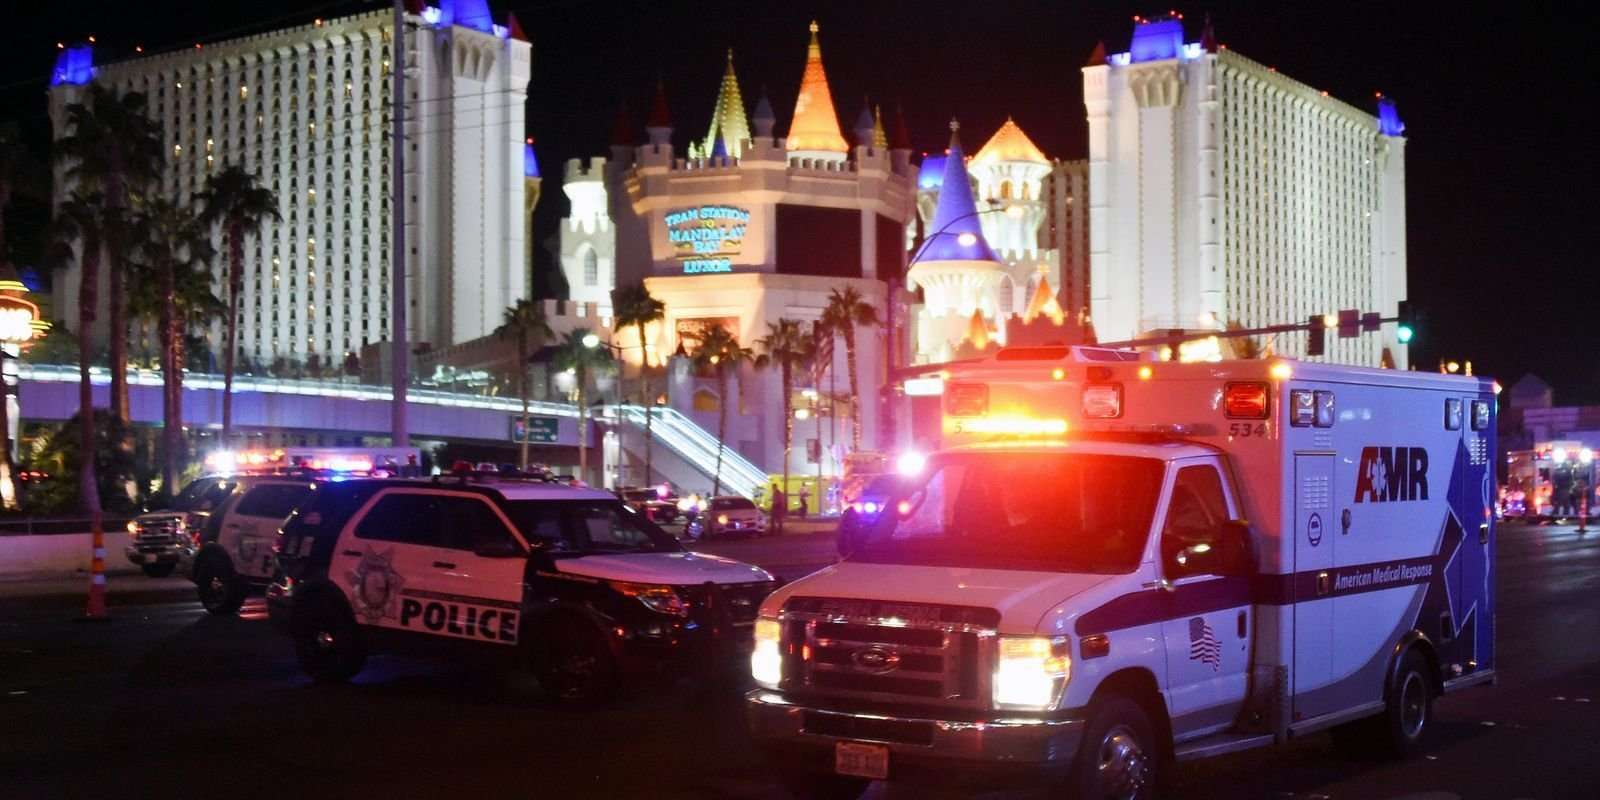 image for Who is Stephen Paddock? Police say he killed 58 in Las Vegas shooting rampage